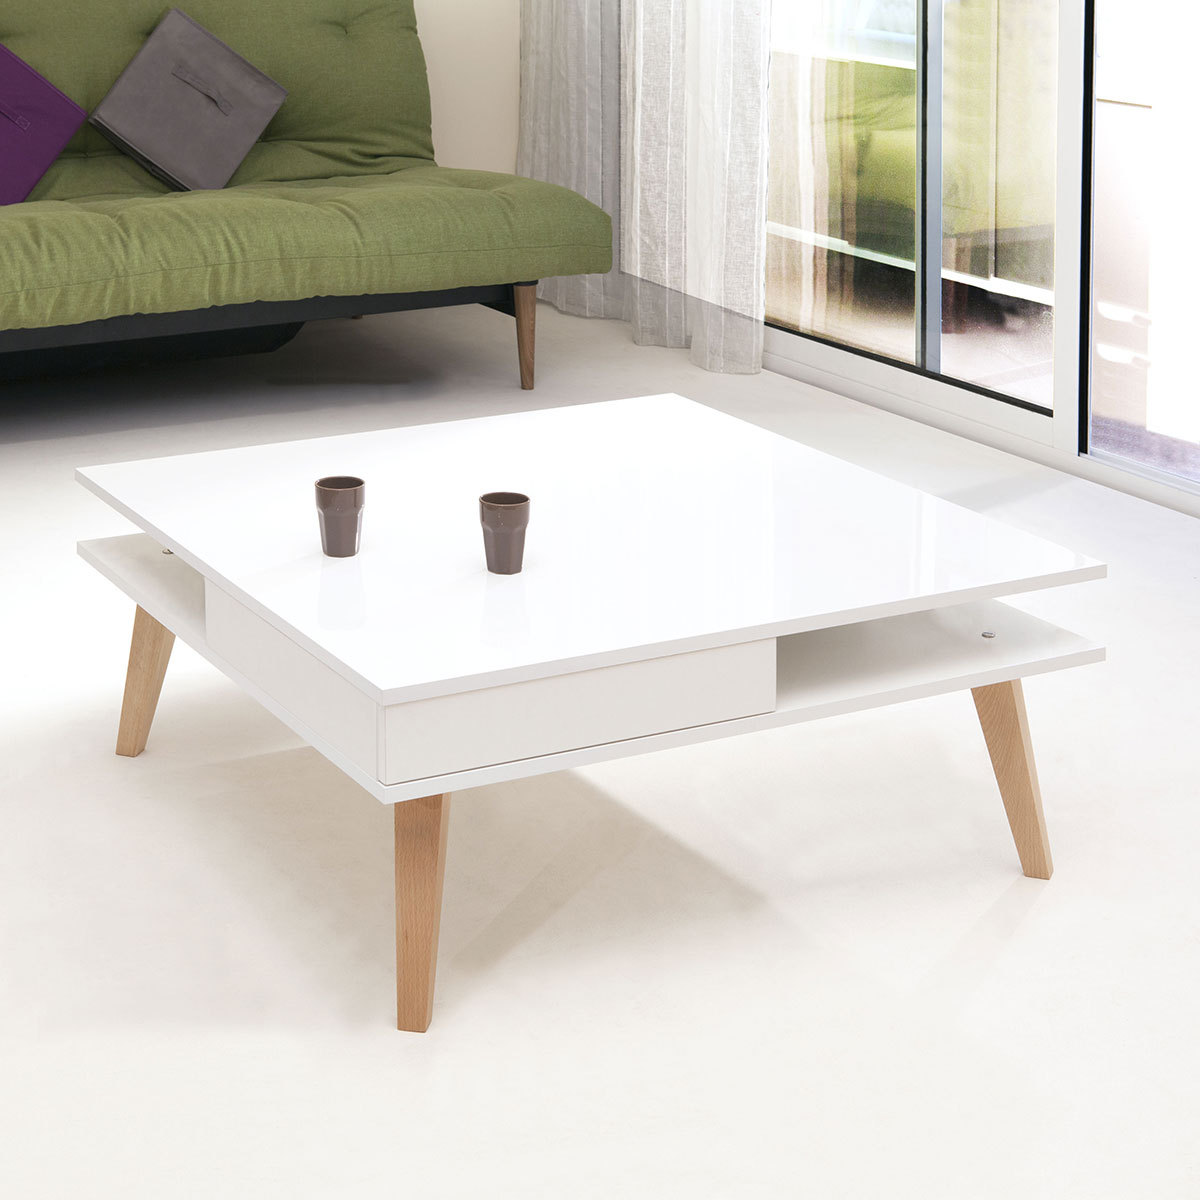 Table basse blanche pieds bois